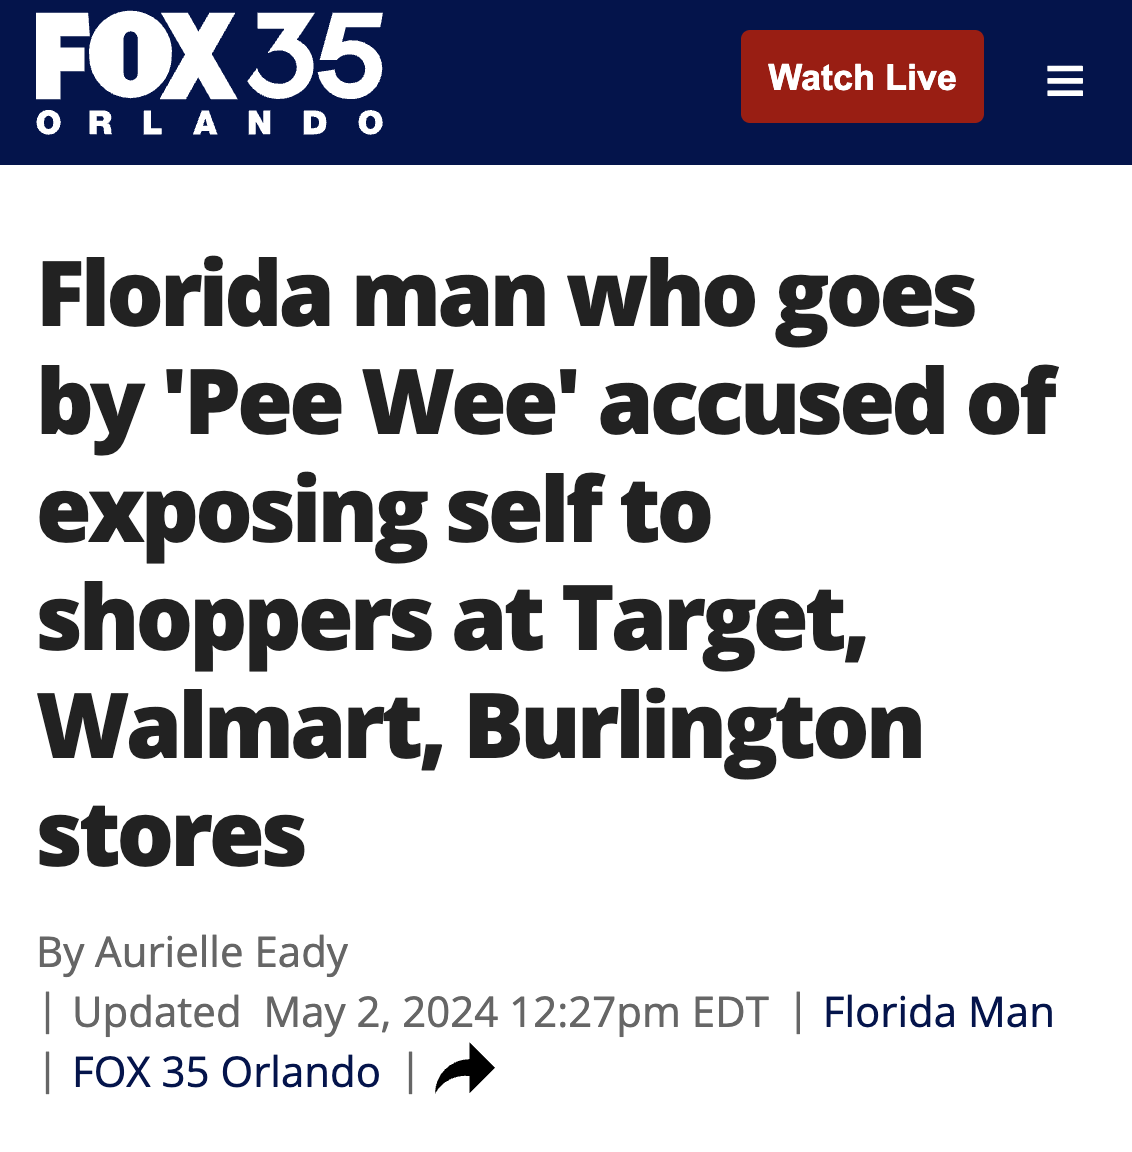 screenshot - Fox 35 Orlando Iii Watch Live Florida man who goes by 'Pee Wee' accused of exposing self to shoppers at Target, Walmart, Burlington stores By Aurielle Eady | Updated pm Edt | Florida Man | Fox 35 Orlando